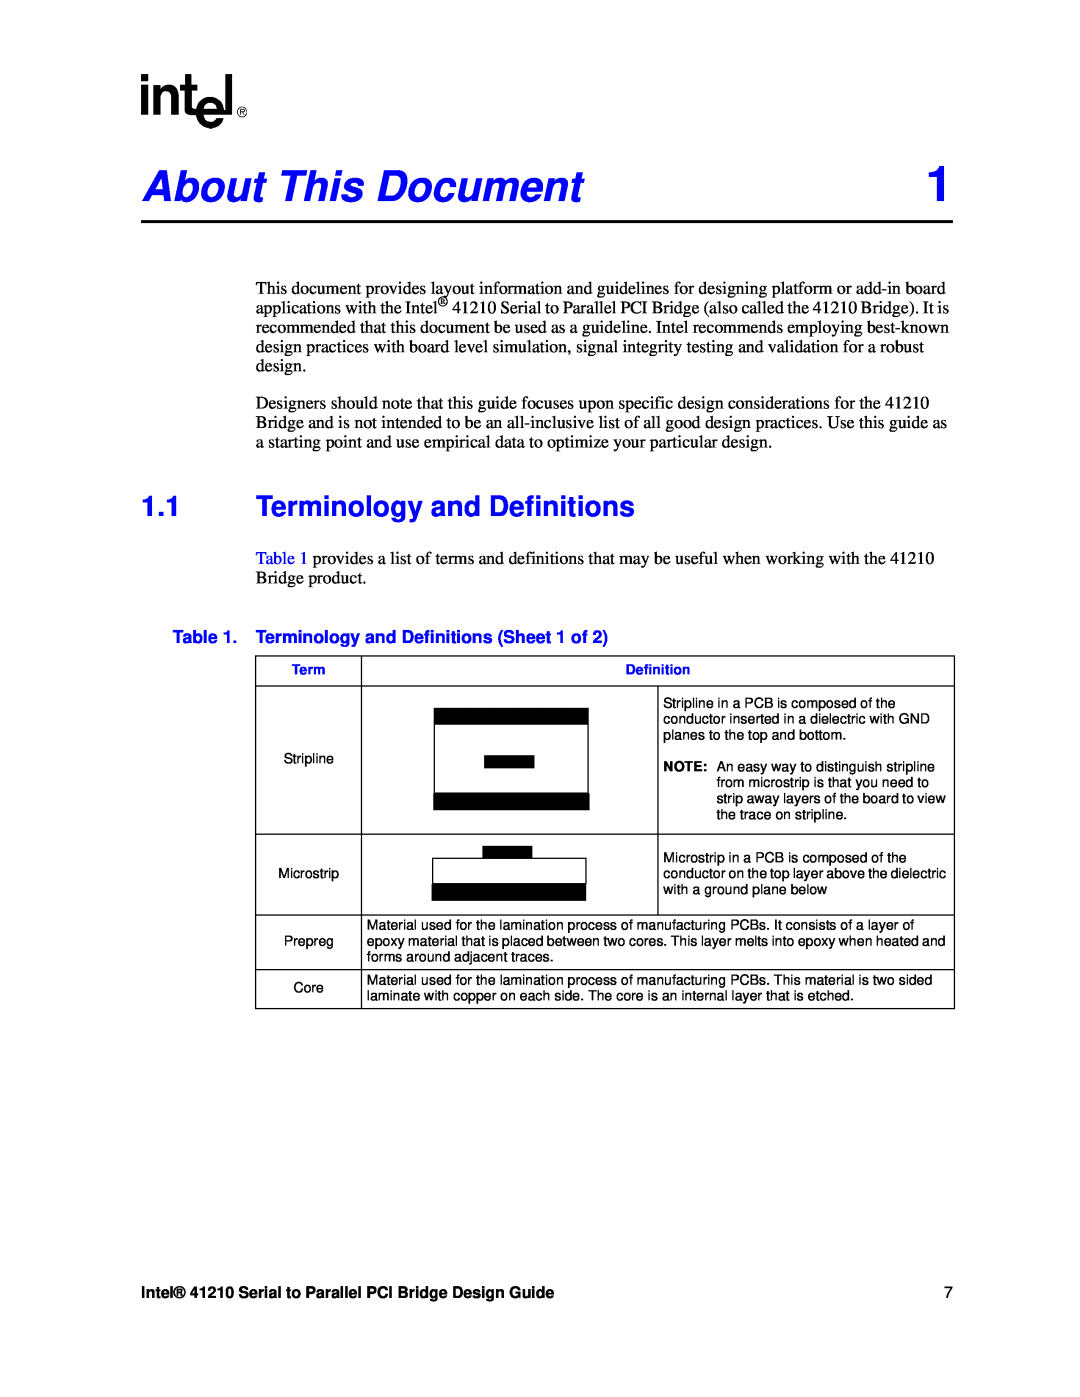 Intel 41210 manual About This Document, Terminology and Definitions Sheet 1 of 